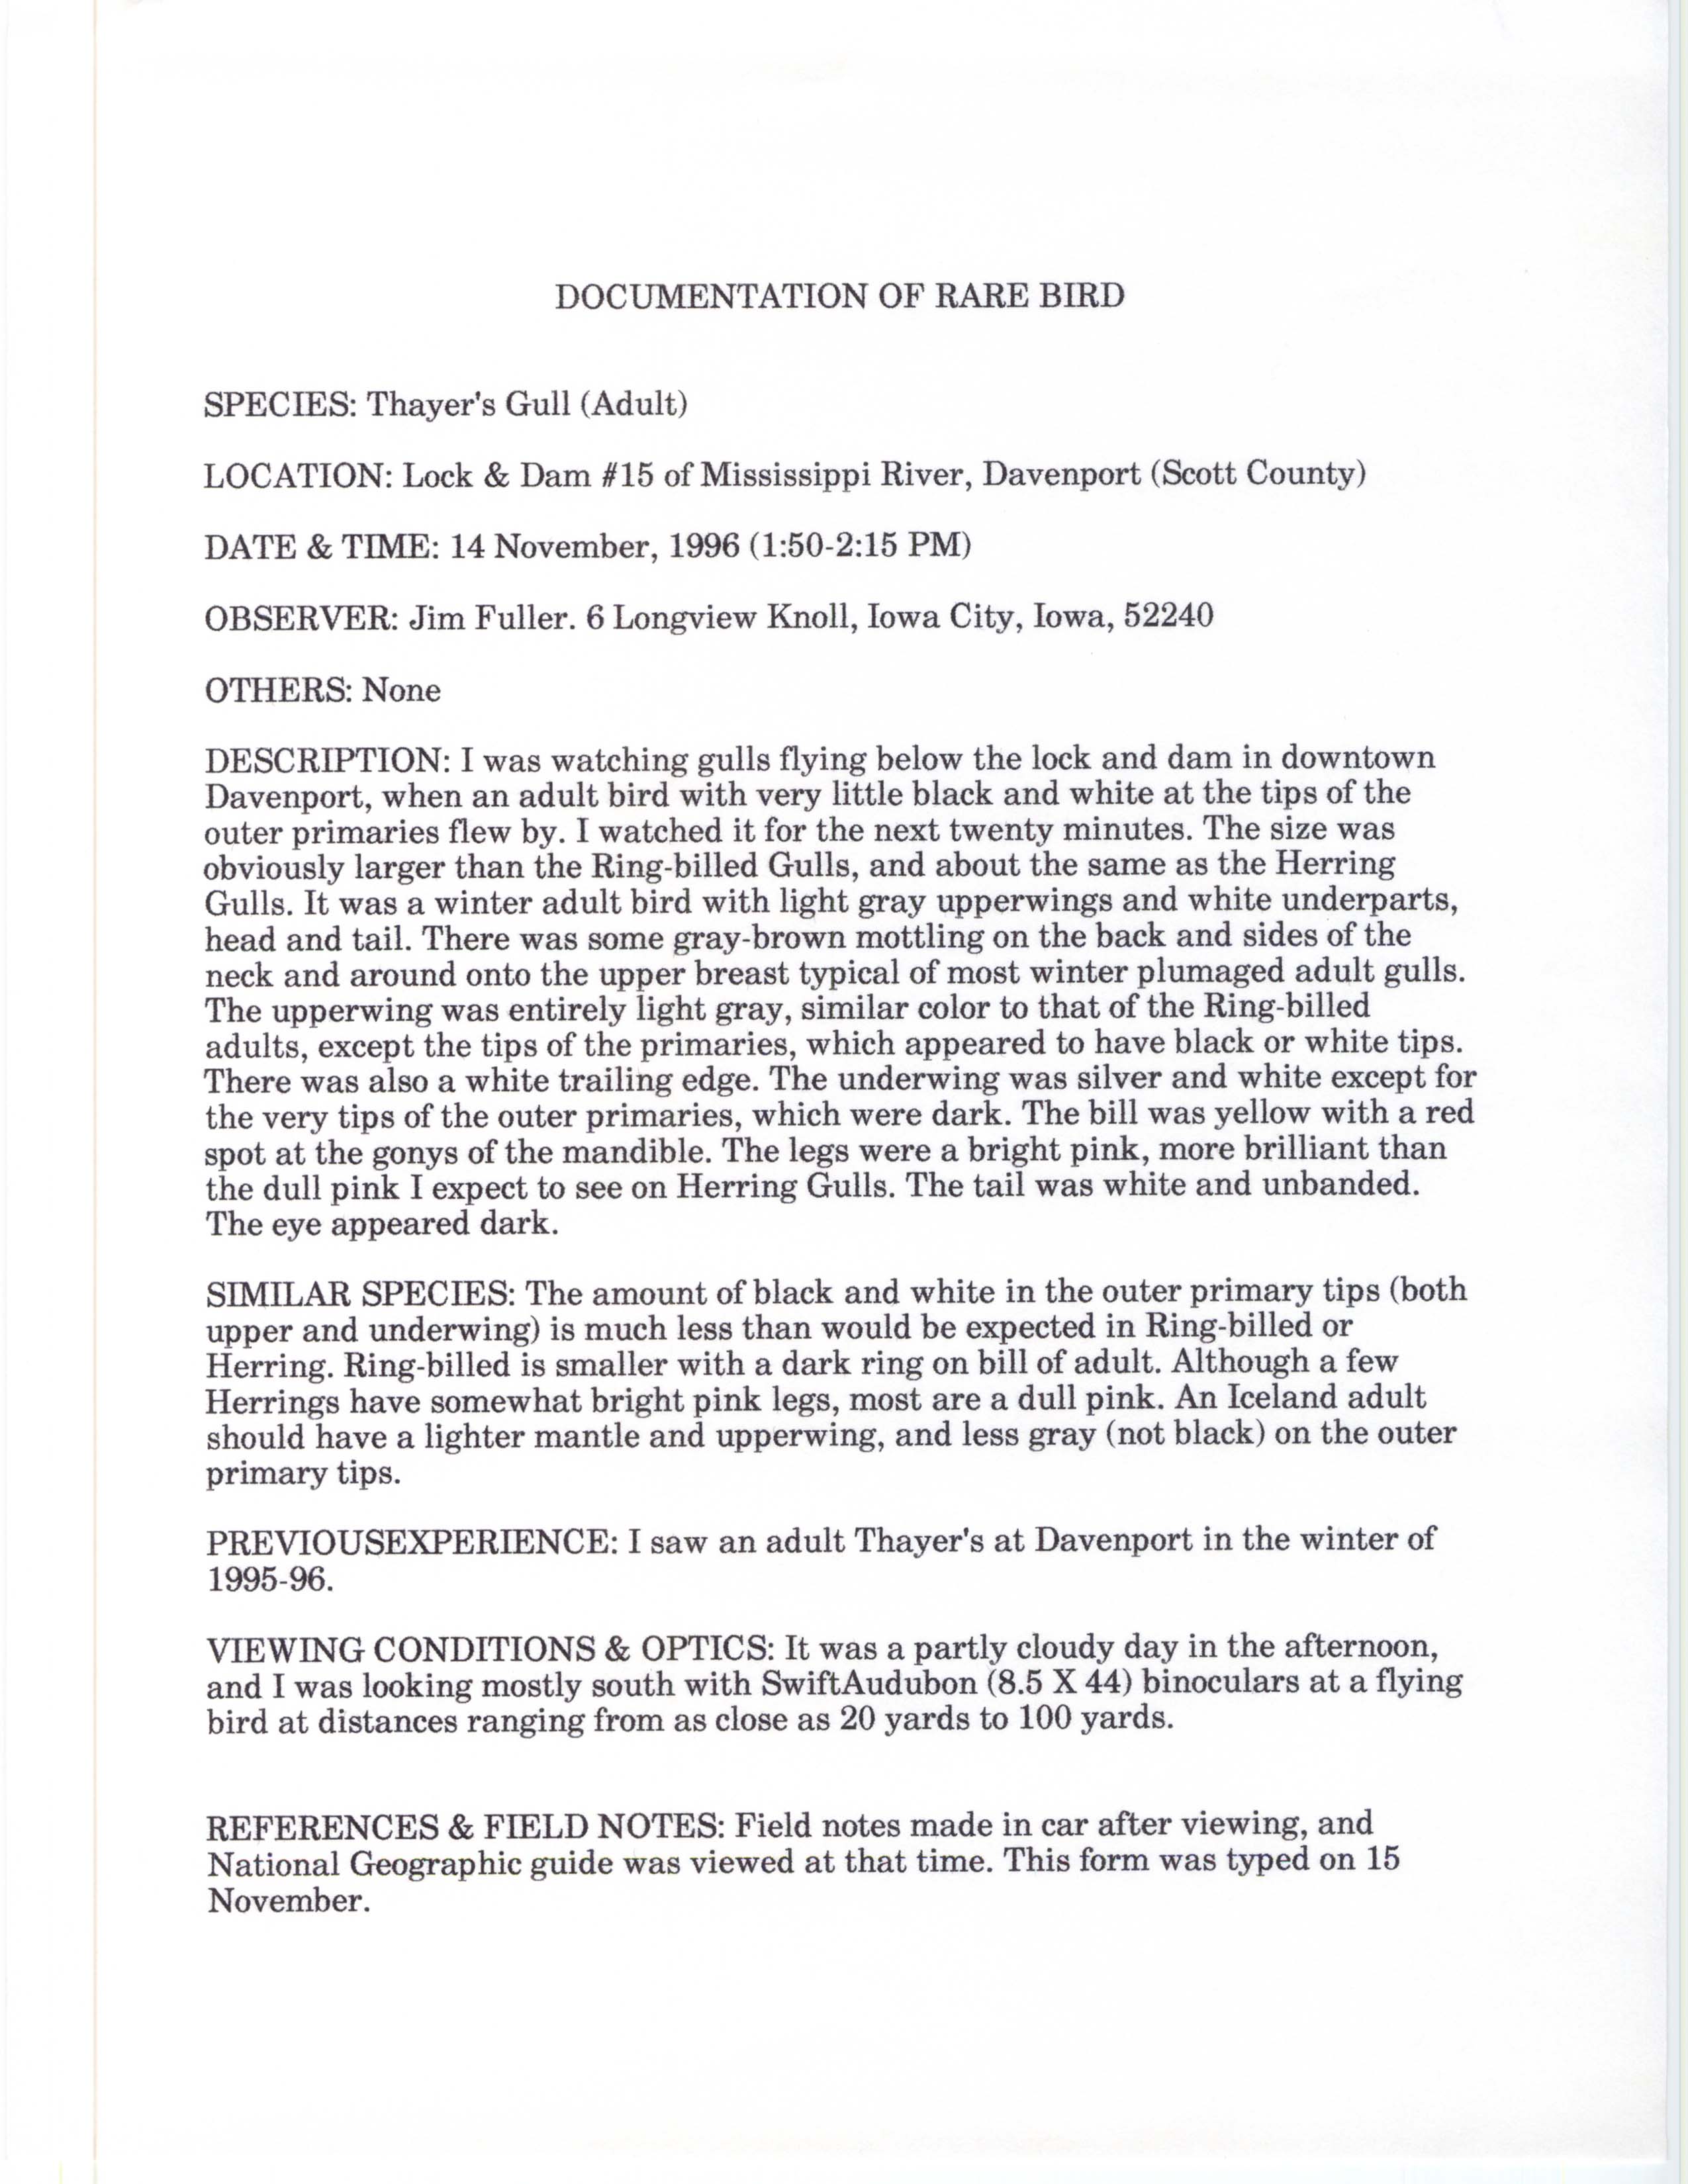 Rare bird documentation form for Thayer's Gull at Lock and Dam 15 in Davenport, 1996